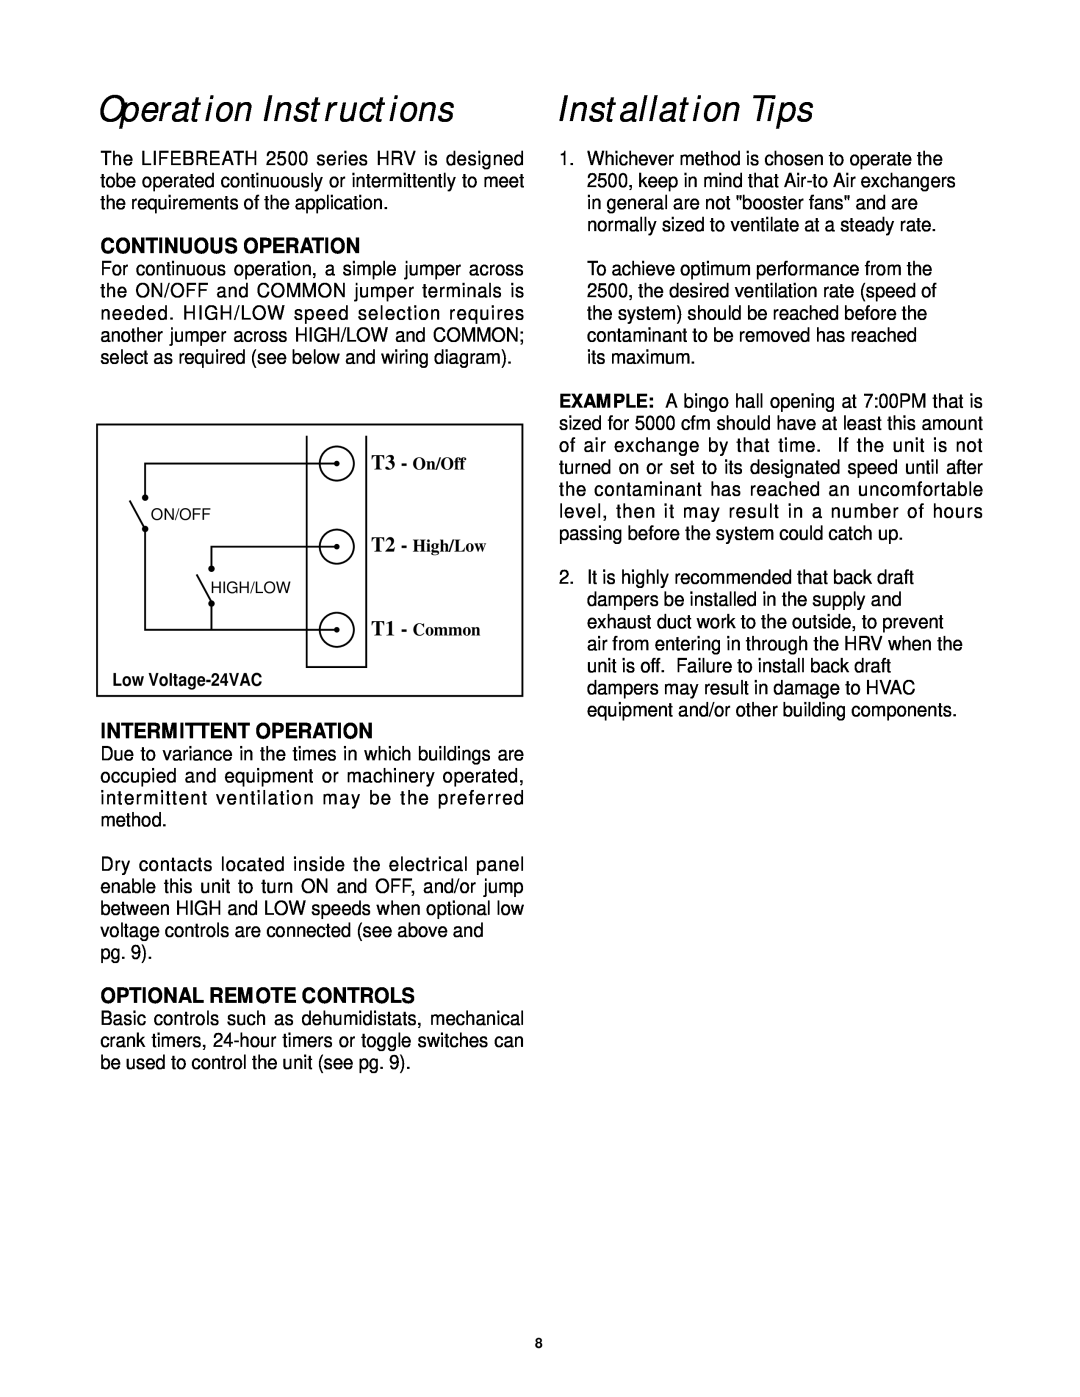 Lifebreath 2500IFD Operation Instructions, Installation Tips, Continuous Operation, Intermittent Operation 